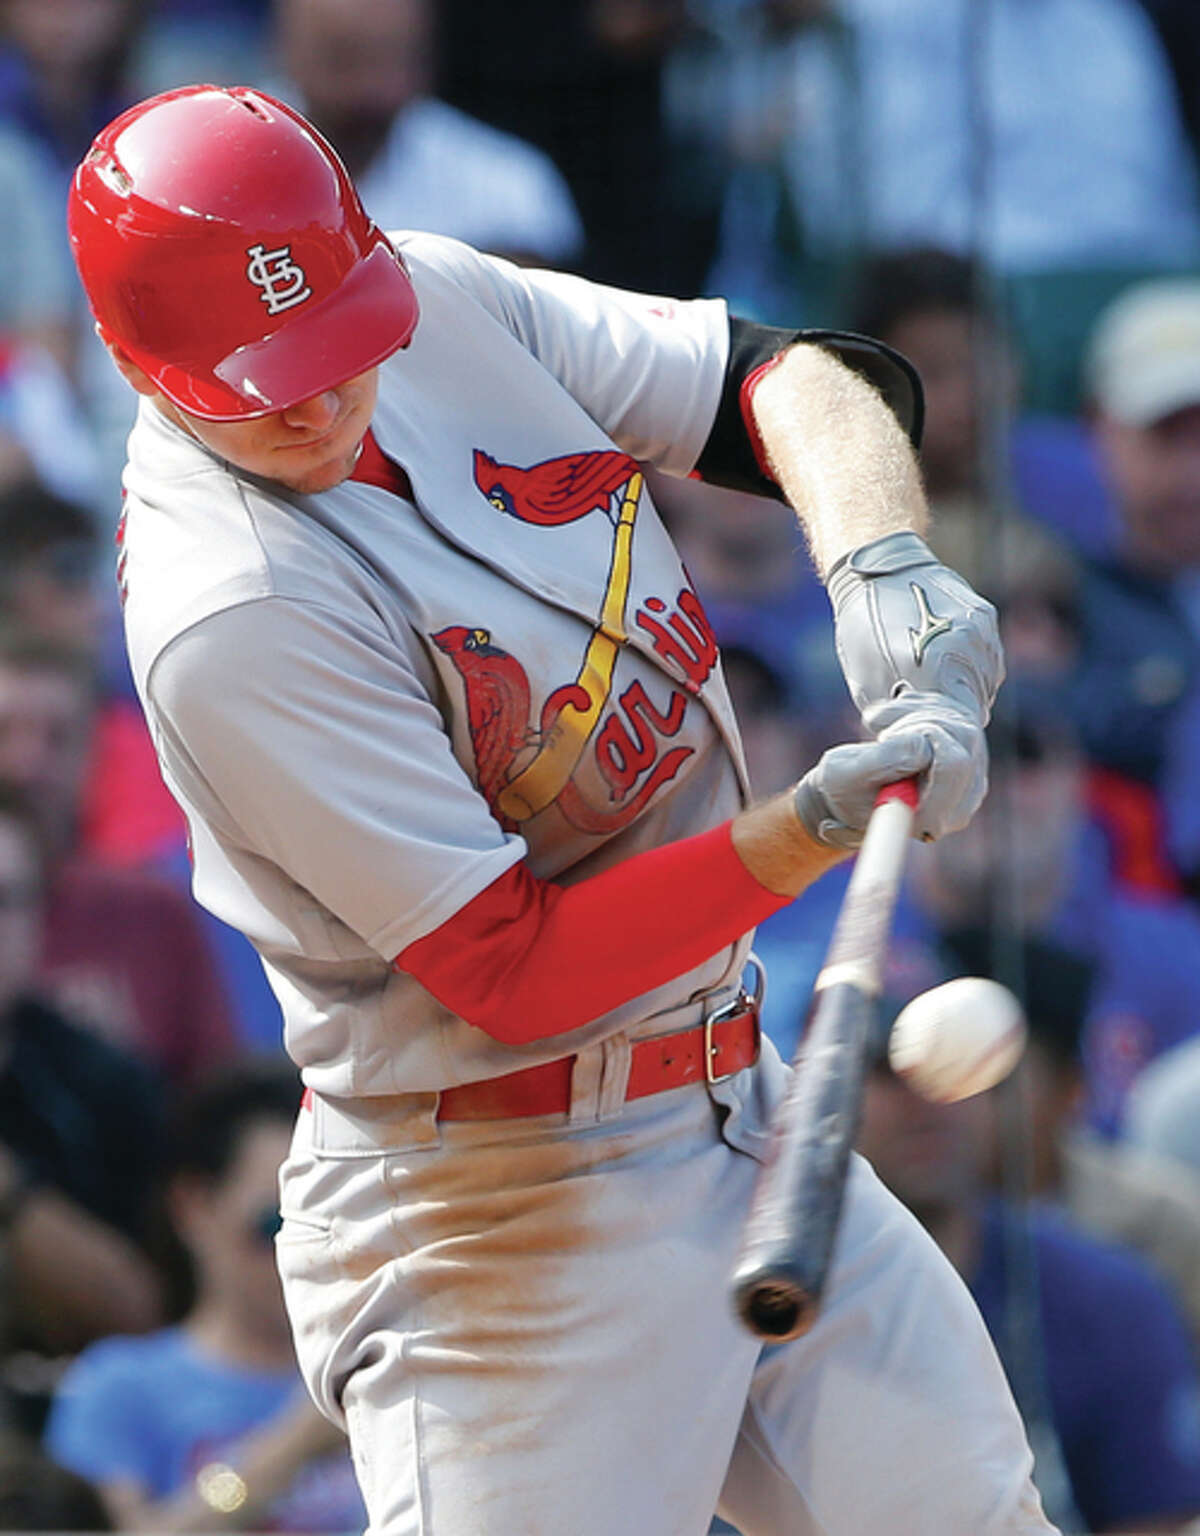 The Cardinals’ Stephen Piscotty hits a RBI single against the Cubs during the eighth inning Saturday in Chicago.